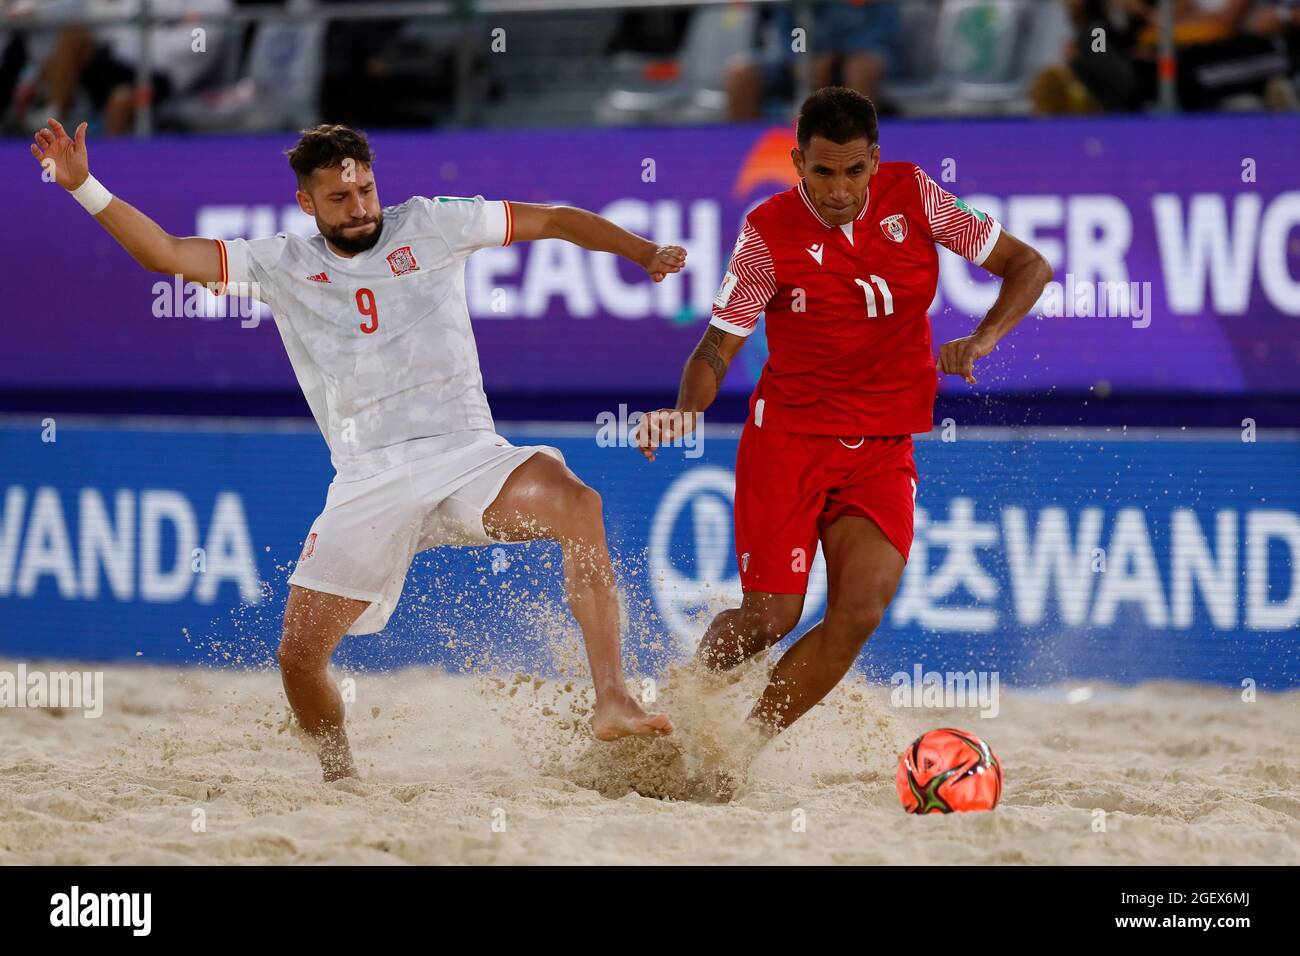 21st August 2021; Luzhniki Stadium, Moscow, Russia: FIFA World Cup Beach  Football tournament; Daniel Teva Zaveroni of Taiti challenges Eduard from  Spain, during the match between Tahiti and Spain, for the 2nd